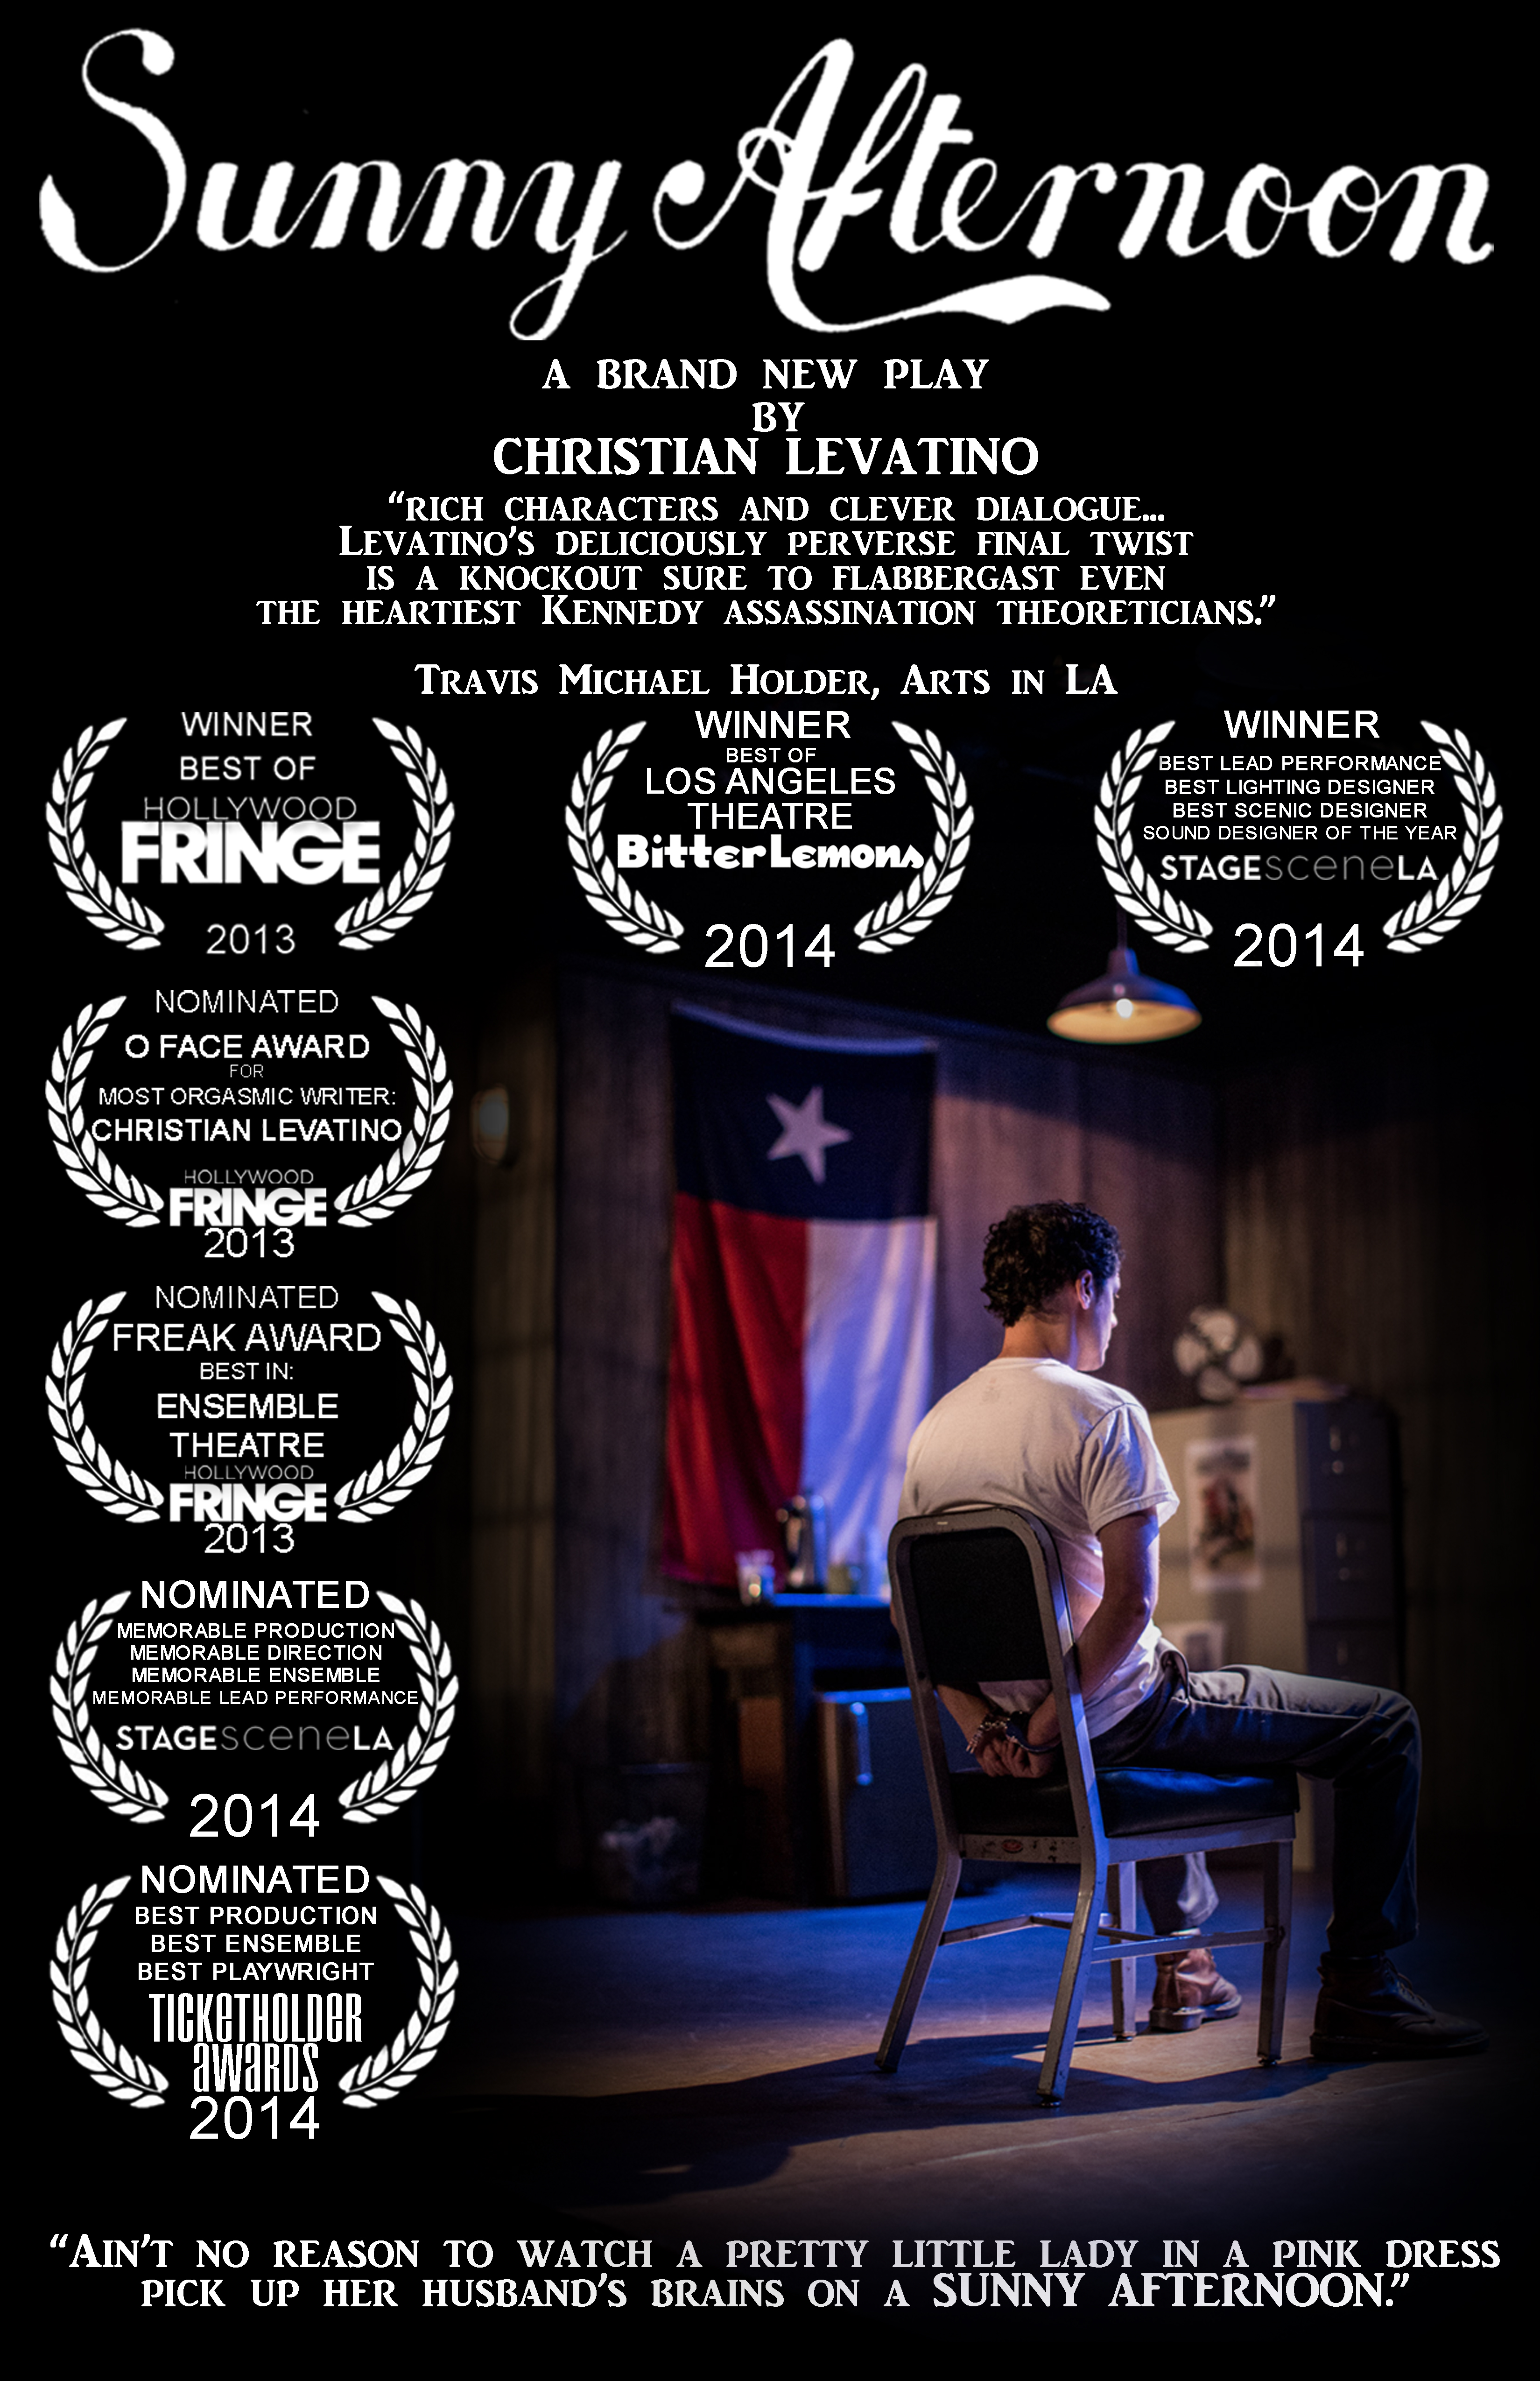 Christian Levatino's original play Sunny Afternoon was nominated for a dozen Los Angeles theatre awards in 2013/2014.